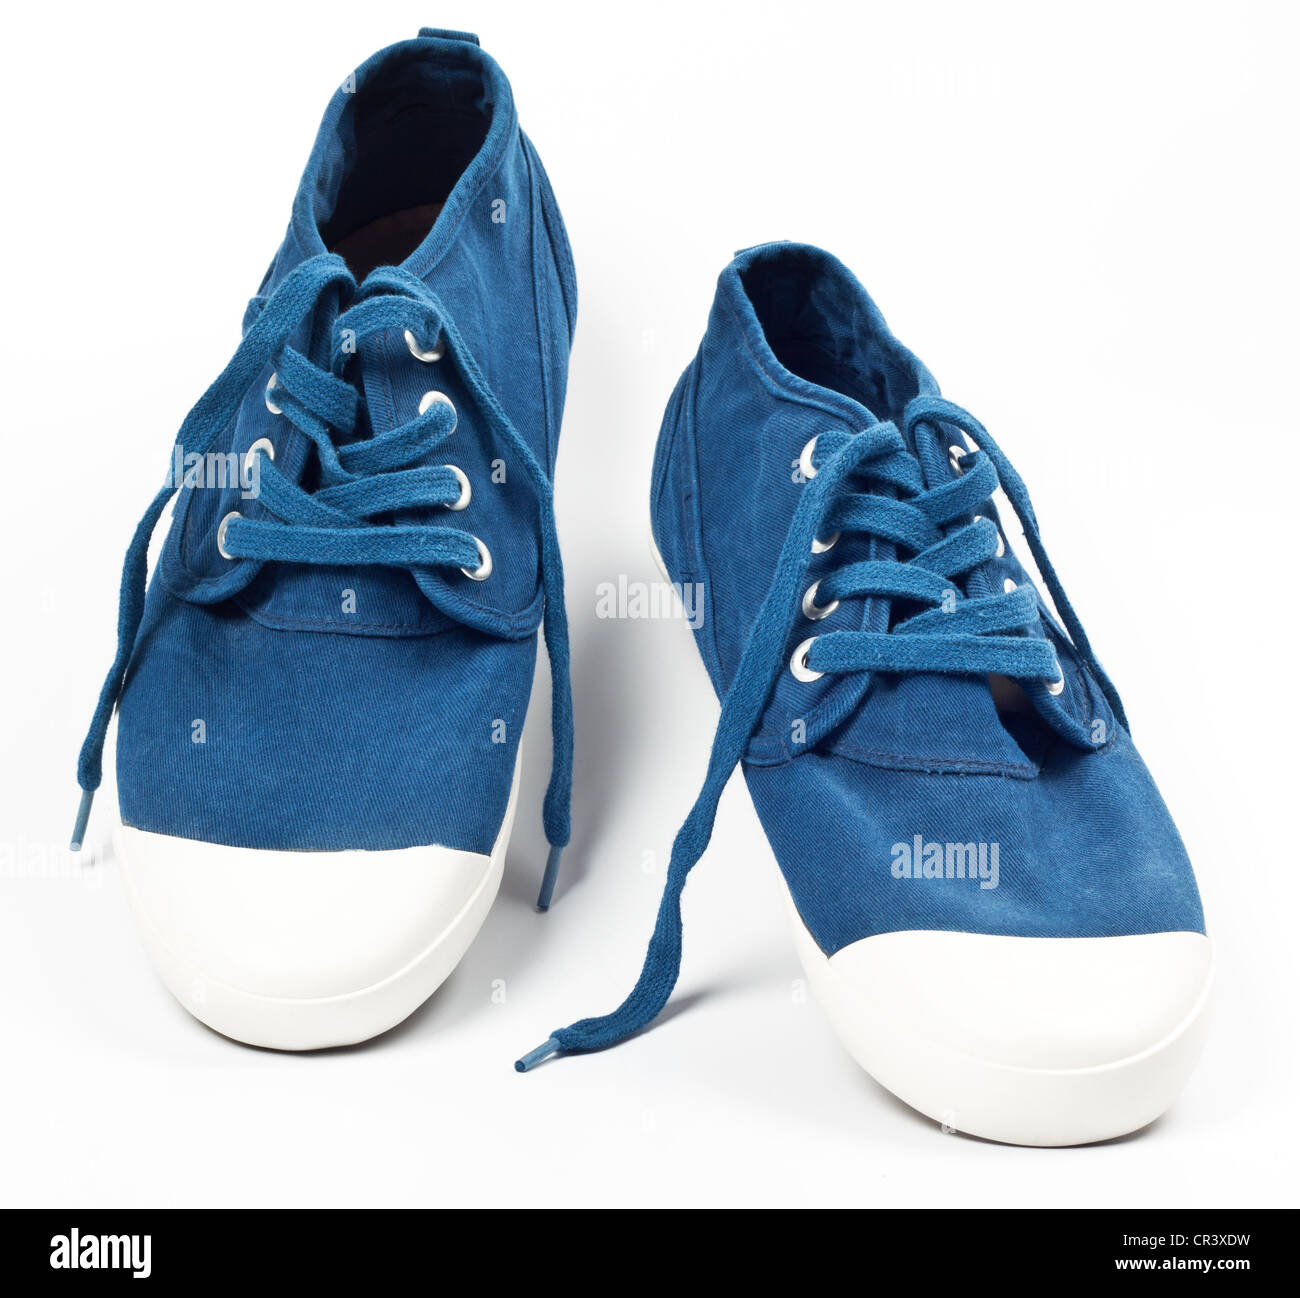 Pair of new blue shoes Stock Photo - Alamy